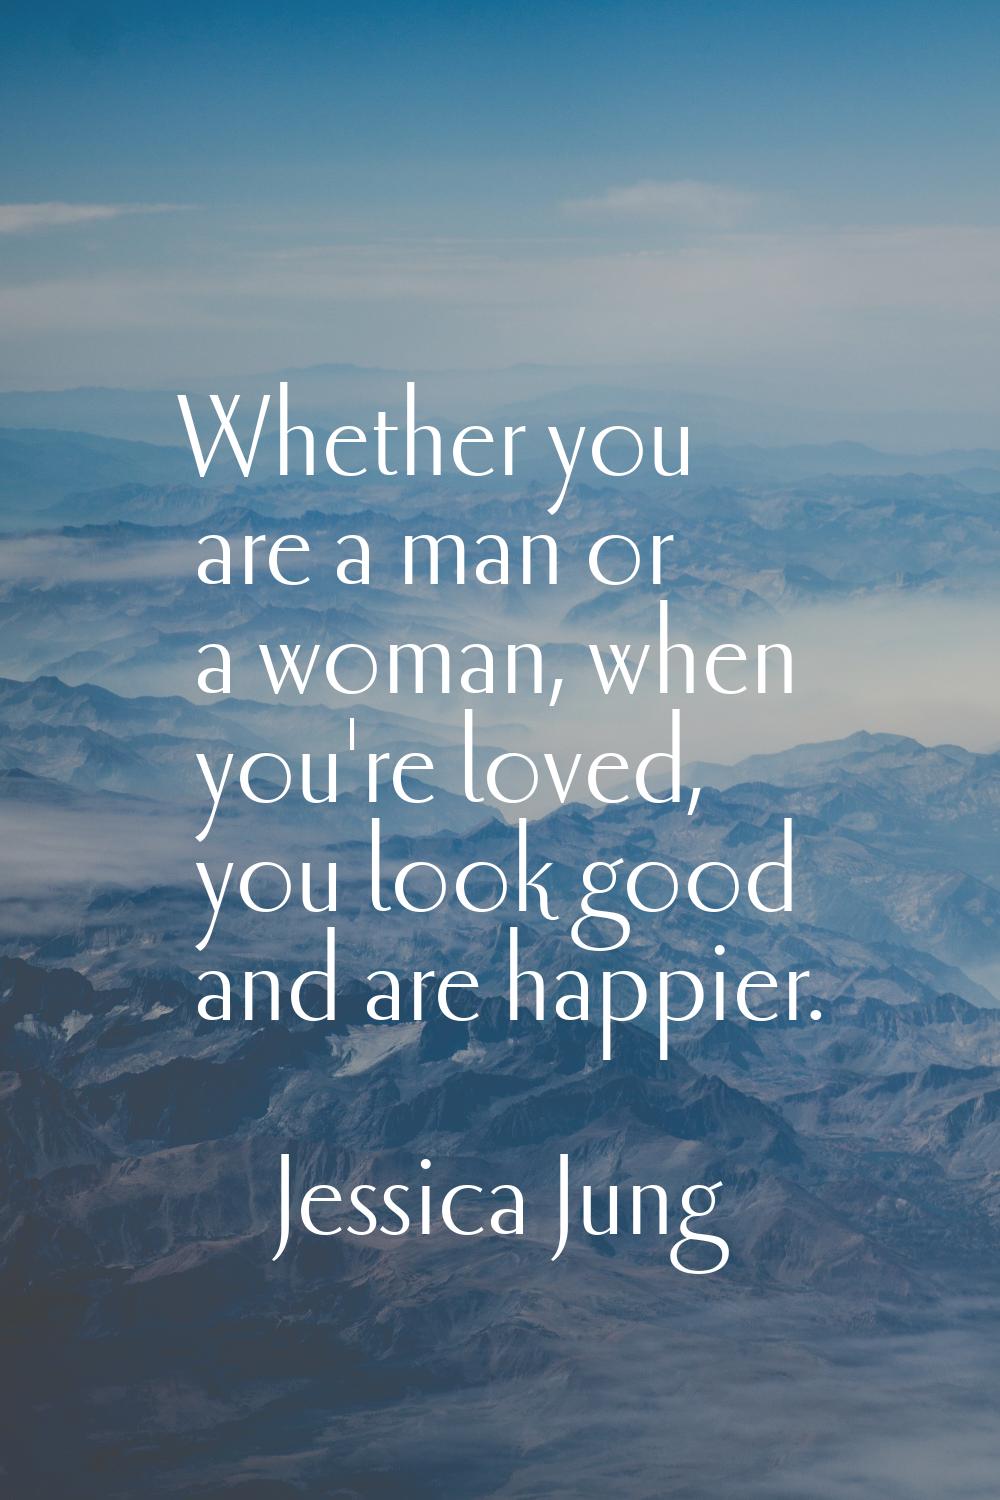 Whether you are a man or a woman, when you're loved, you look good and are happier.